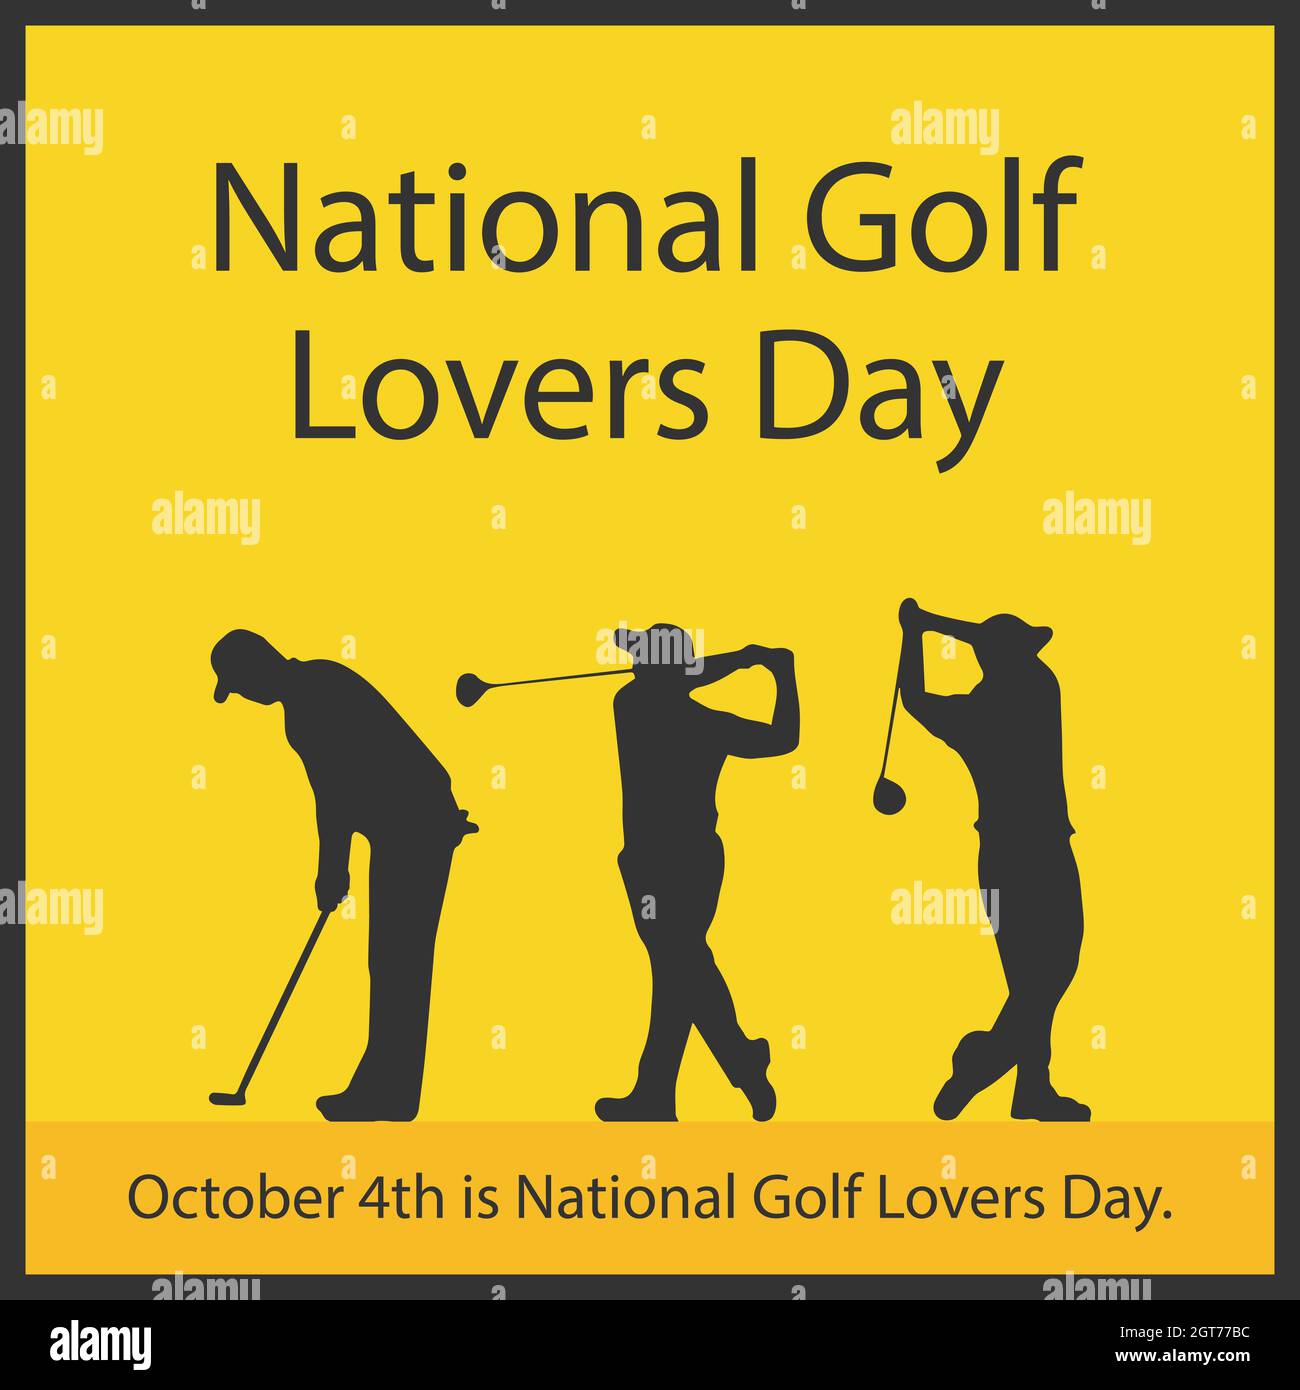 October 4th is National Golf Lovers Day. Stock Vector